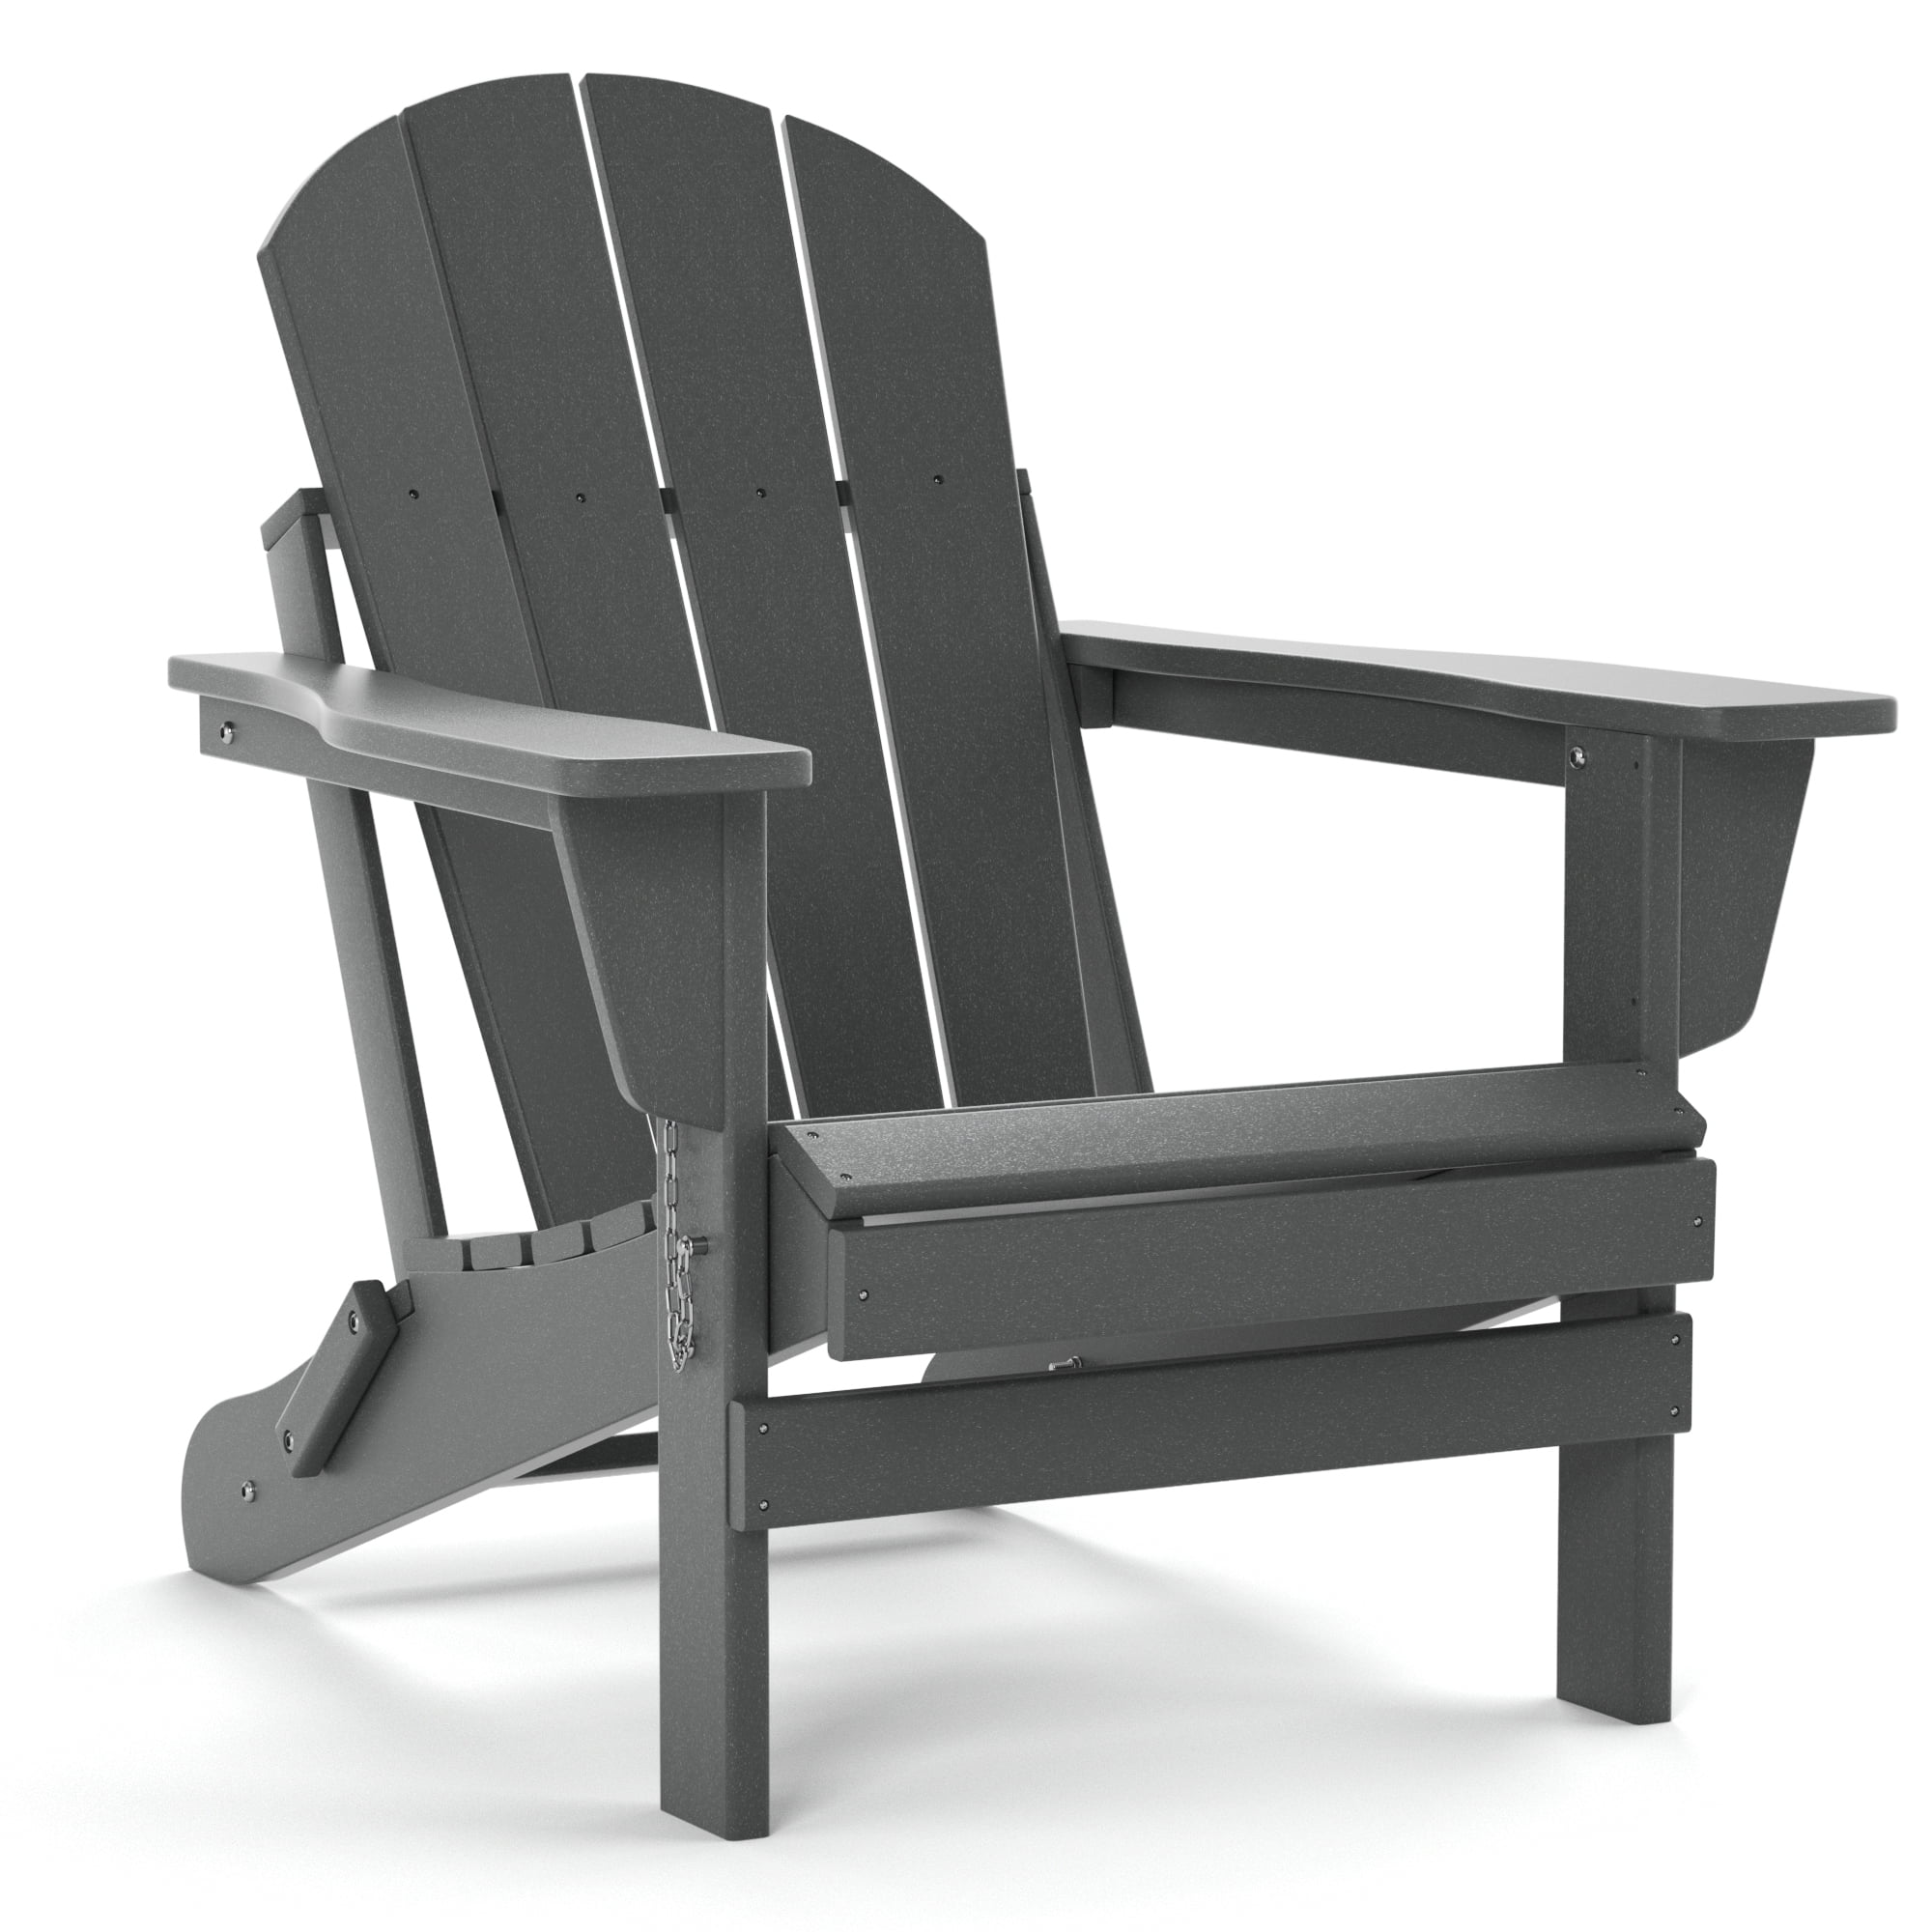 KINGYES HDPE Adirondack Chair White Classic All-Weather Outdoor Patio Adirondack Chair 